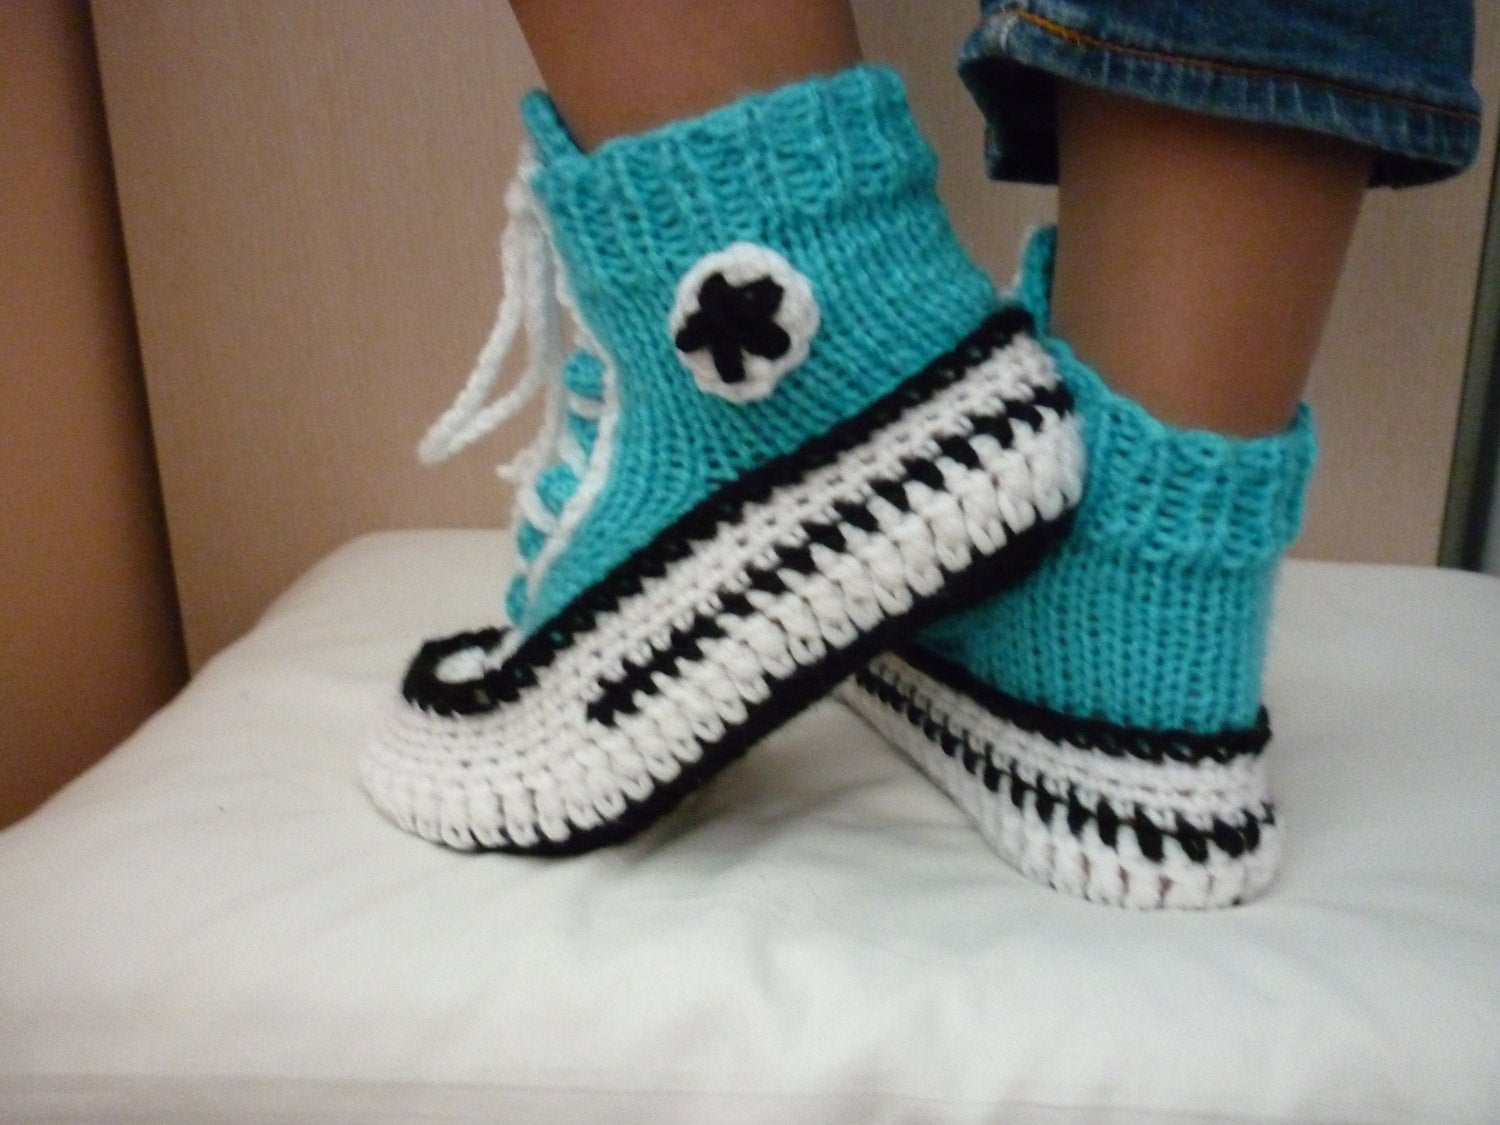 Converse Knitted Slippers Pattern Crochet Pattern Converse Slippers Knitted Pattern Slippers Crochet Pattern Converse Knitted Pattern Converse Woman Converse Slippers